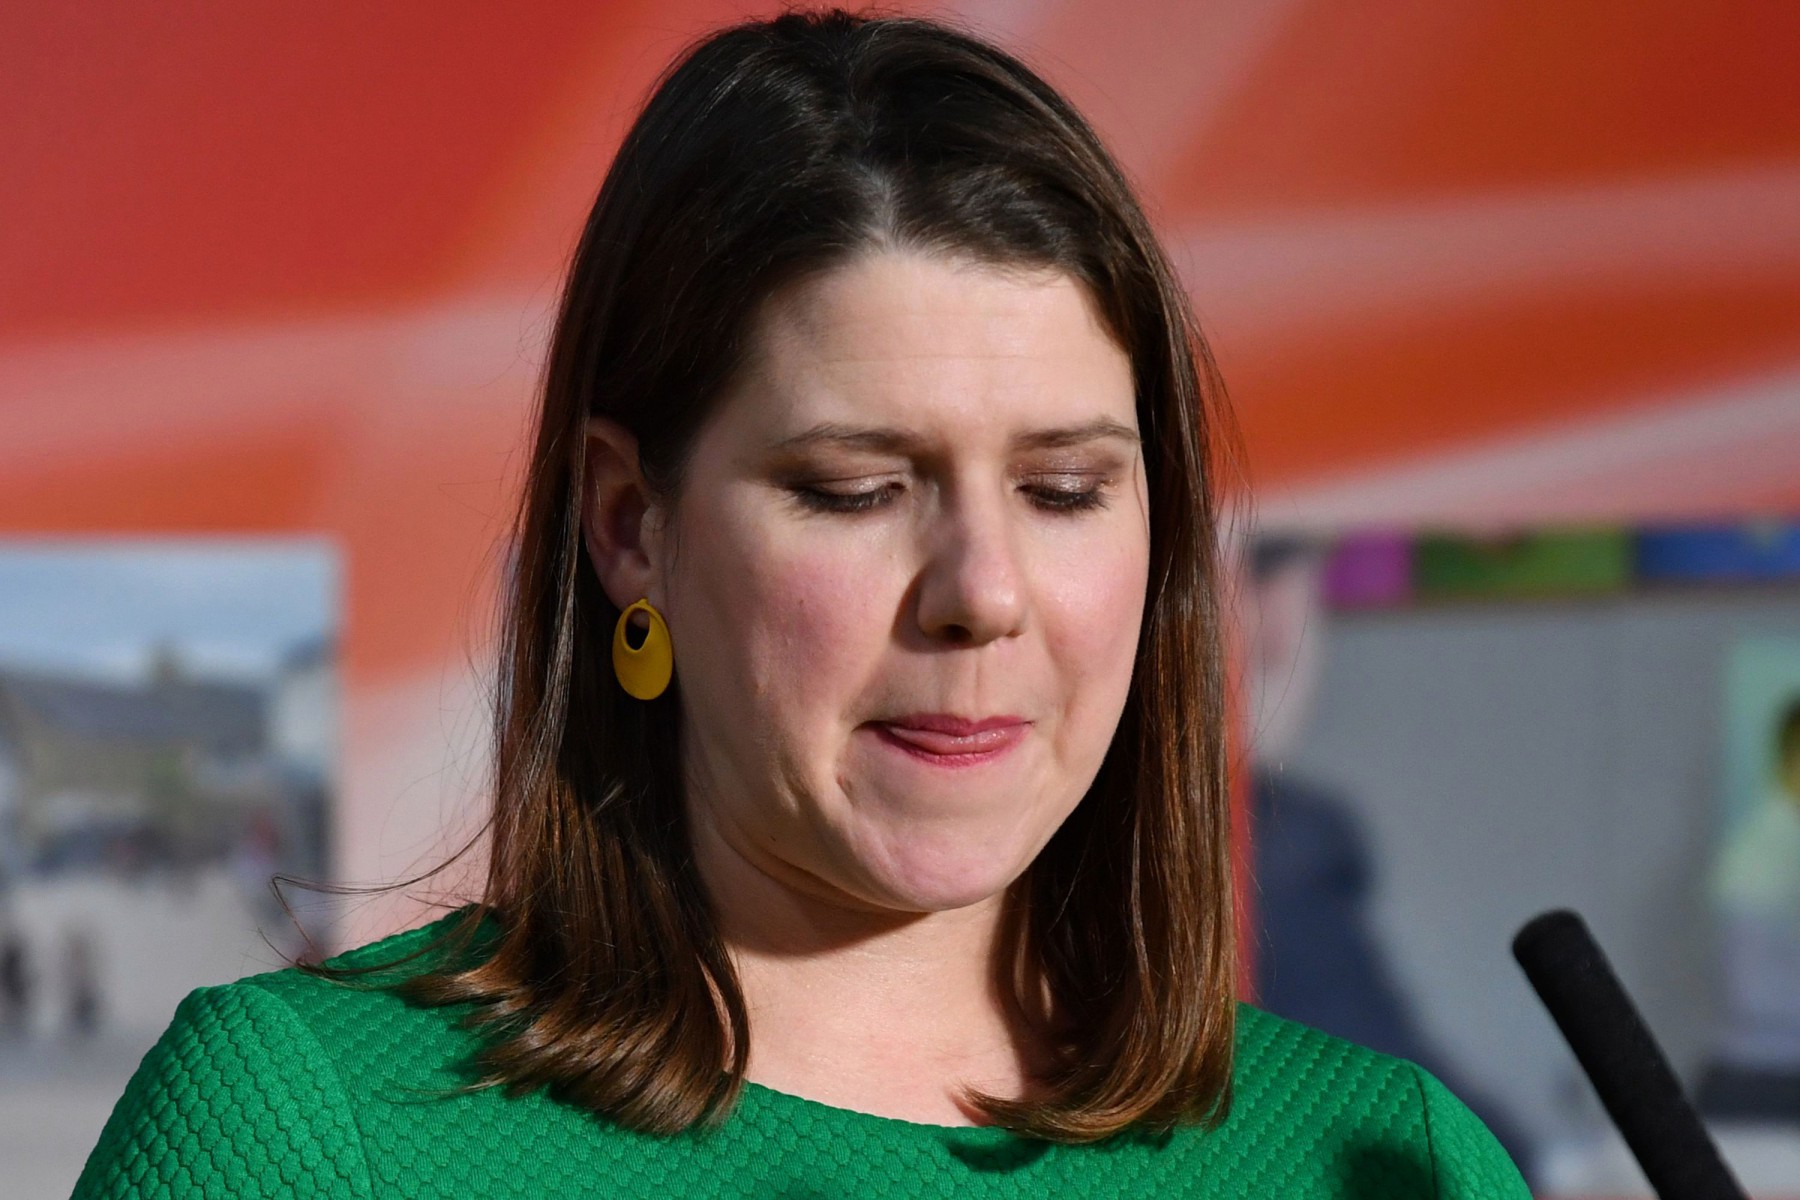 Ms Swinson had only just become leader for the Lib Dems this year